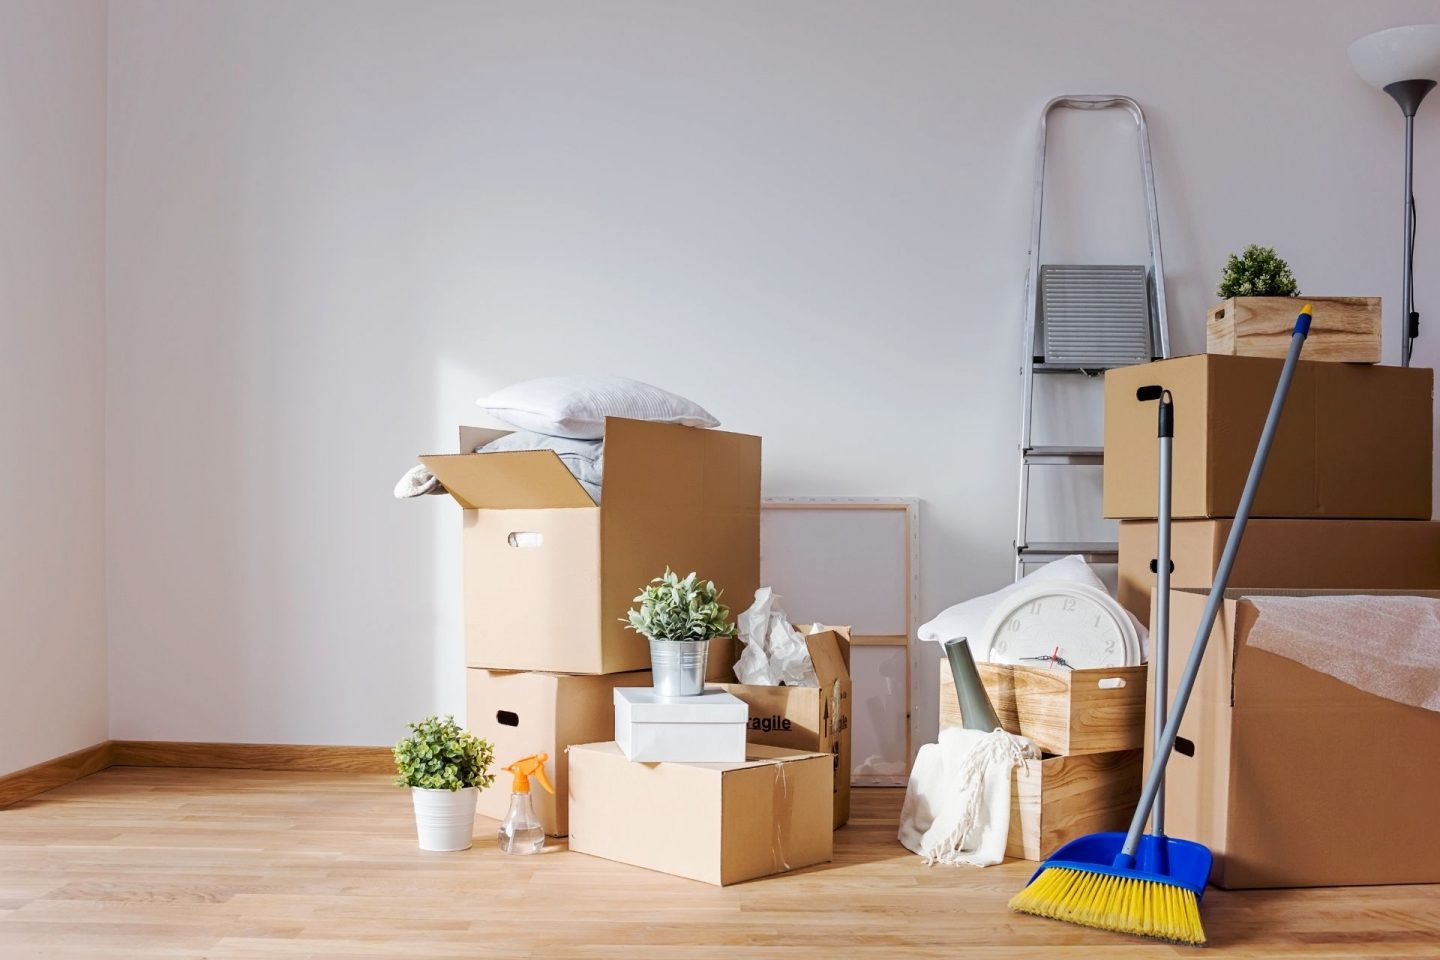 A photo of a room with a wooden floor and white walls. Everything is mostly packed into boxes, though we can see some loose plant pots, set of ladders, and dustpan and brush set.